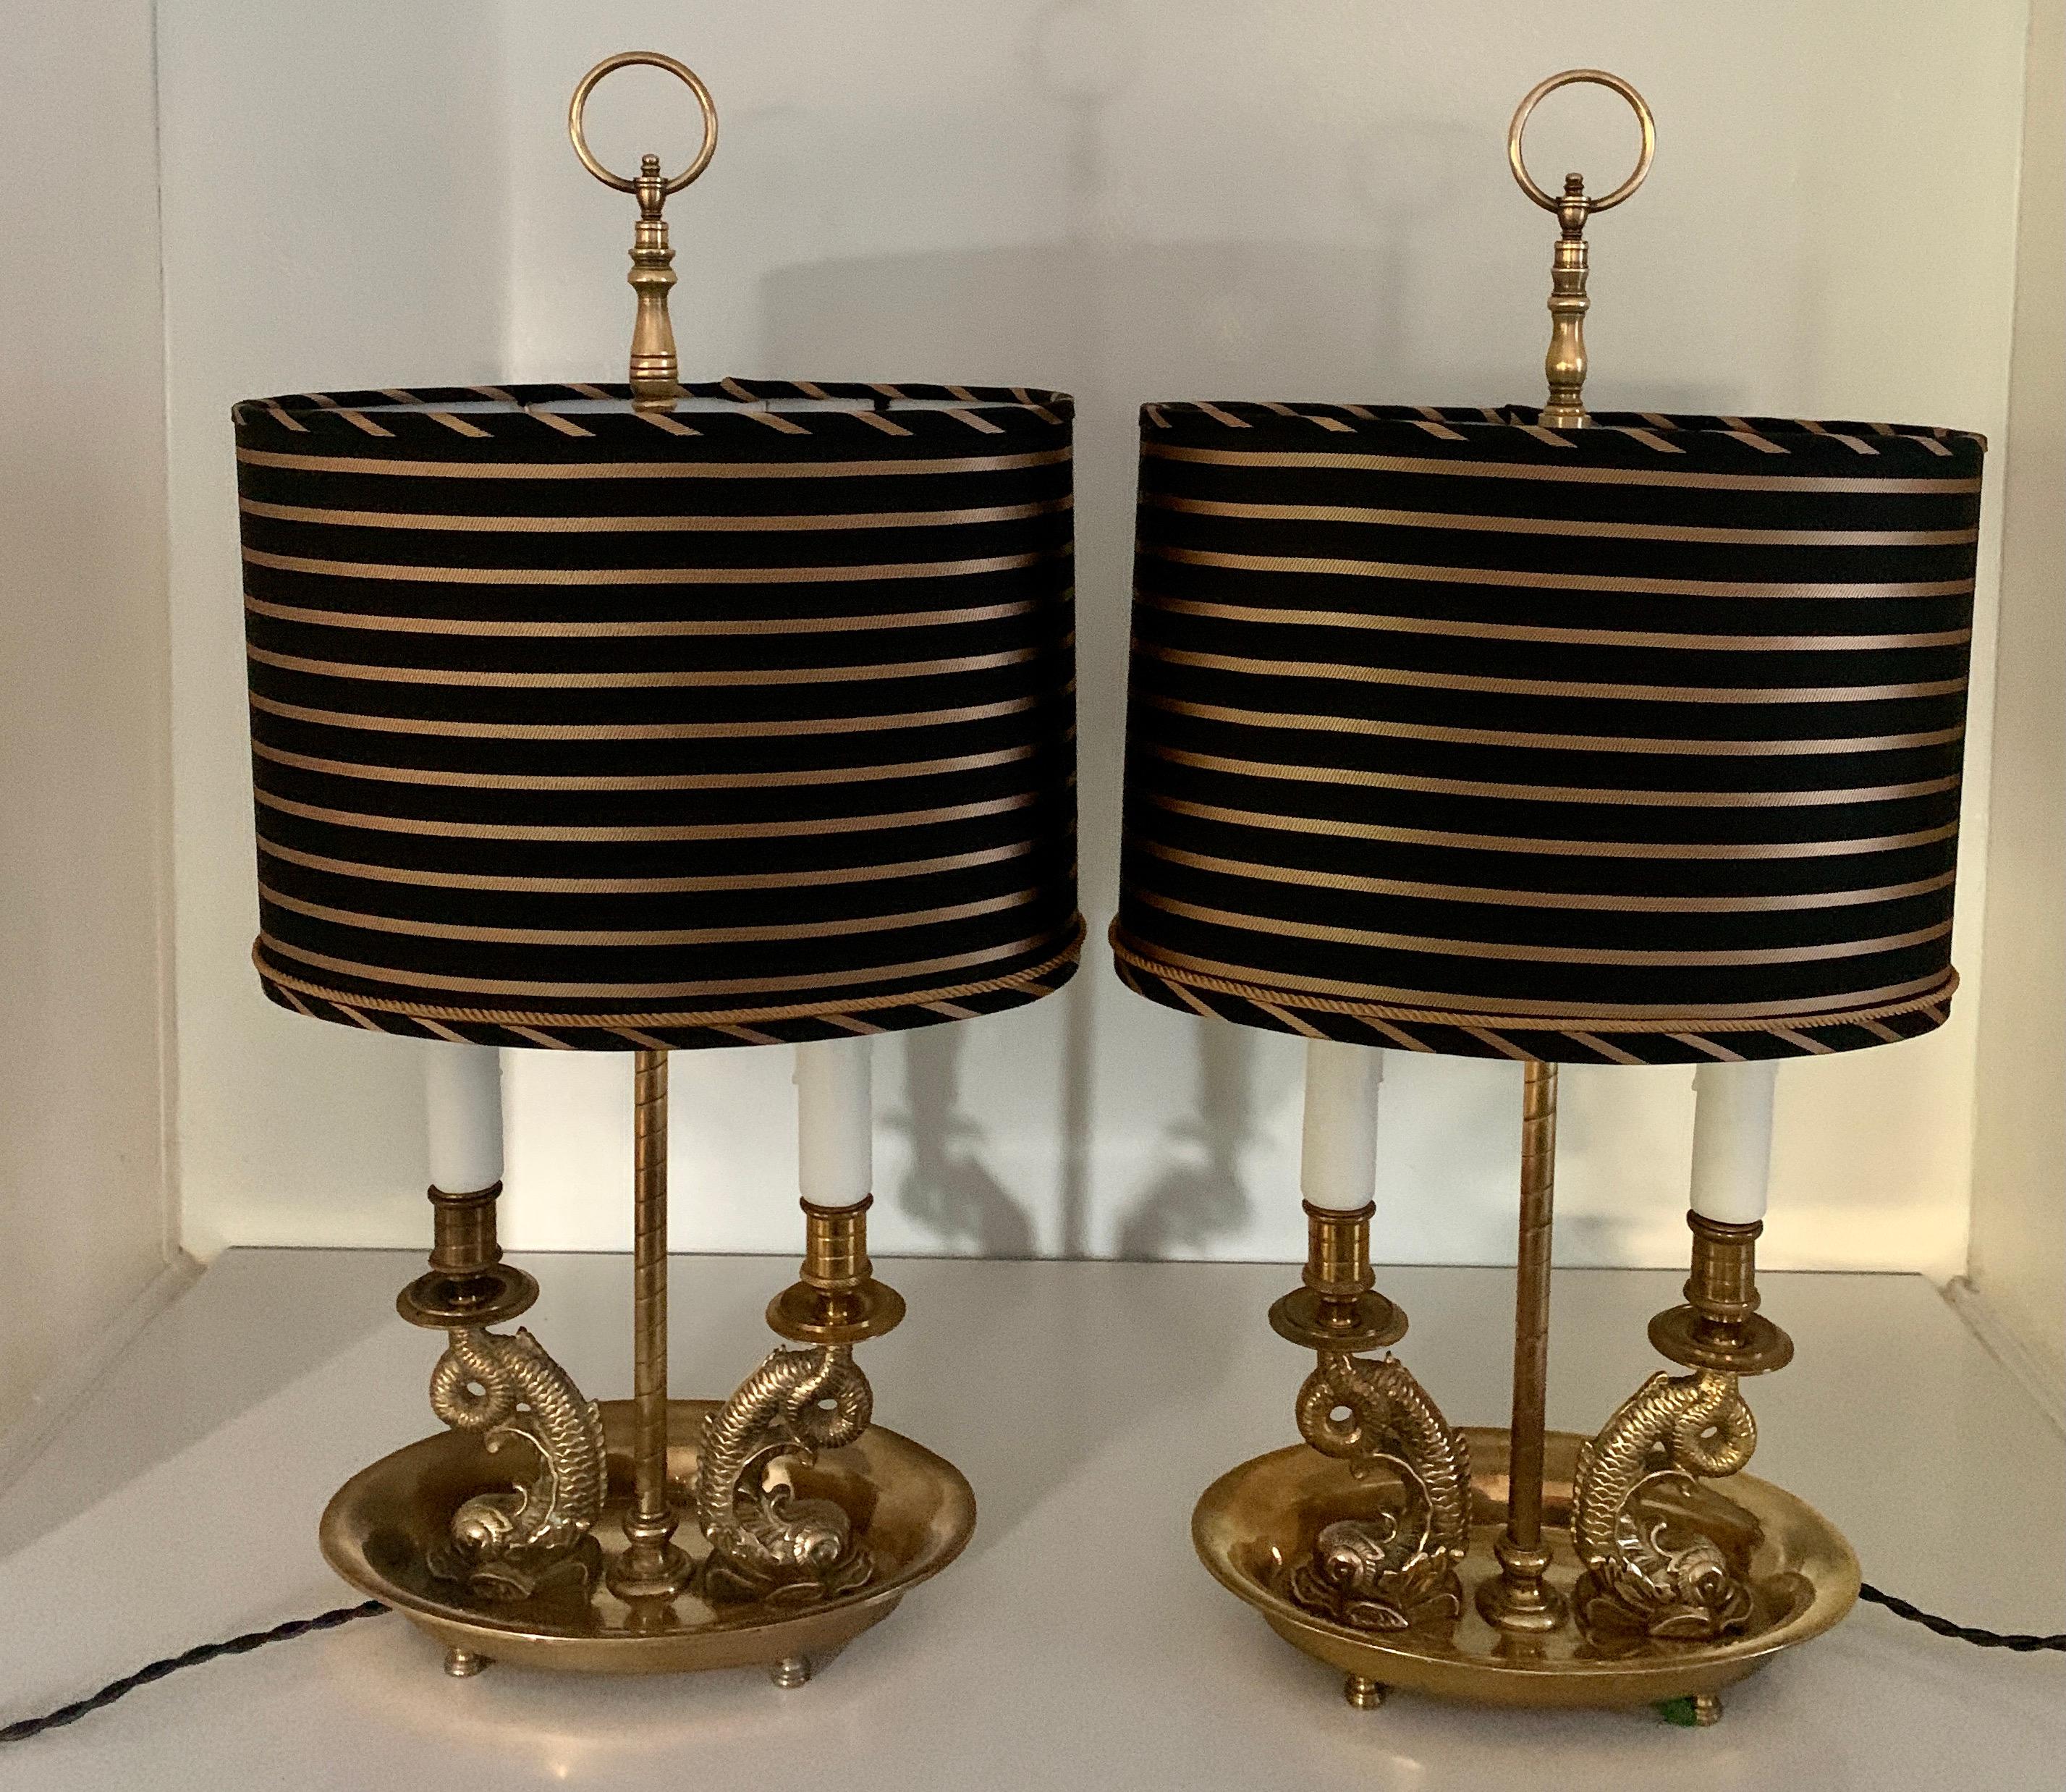 Acquired from a Bevelry Hills Estate, a pair of solid brass dolphin Bouillotte lamps with custom silk shades, the pair have been completely restored and rewired with 6' silk cords and custom designed and fabricated silk shades with gold rope cord.